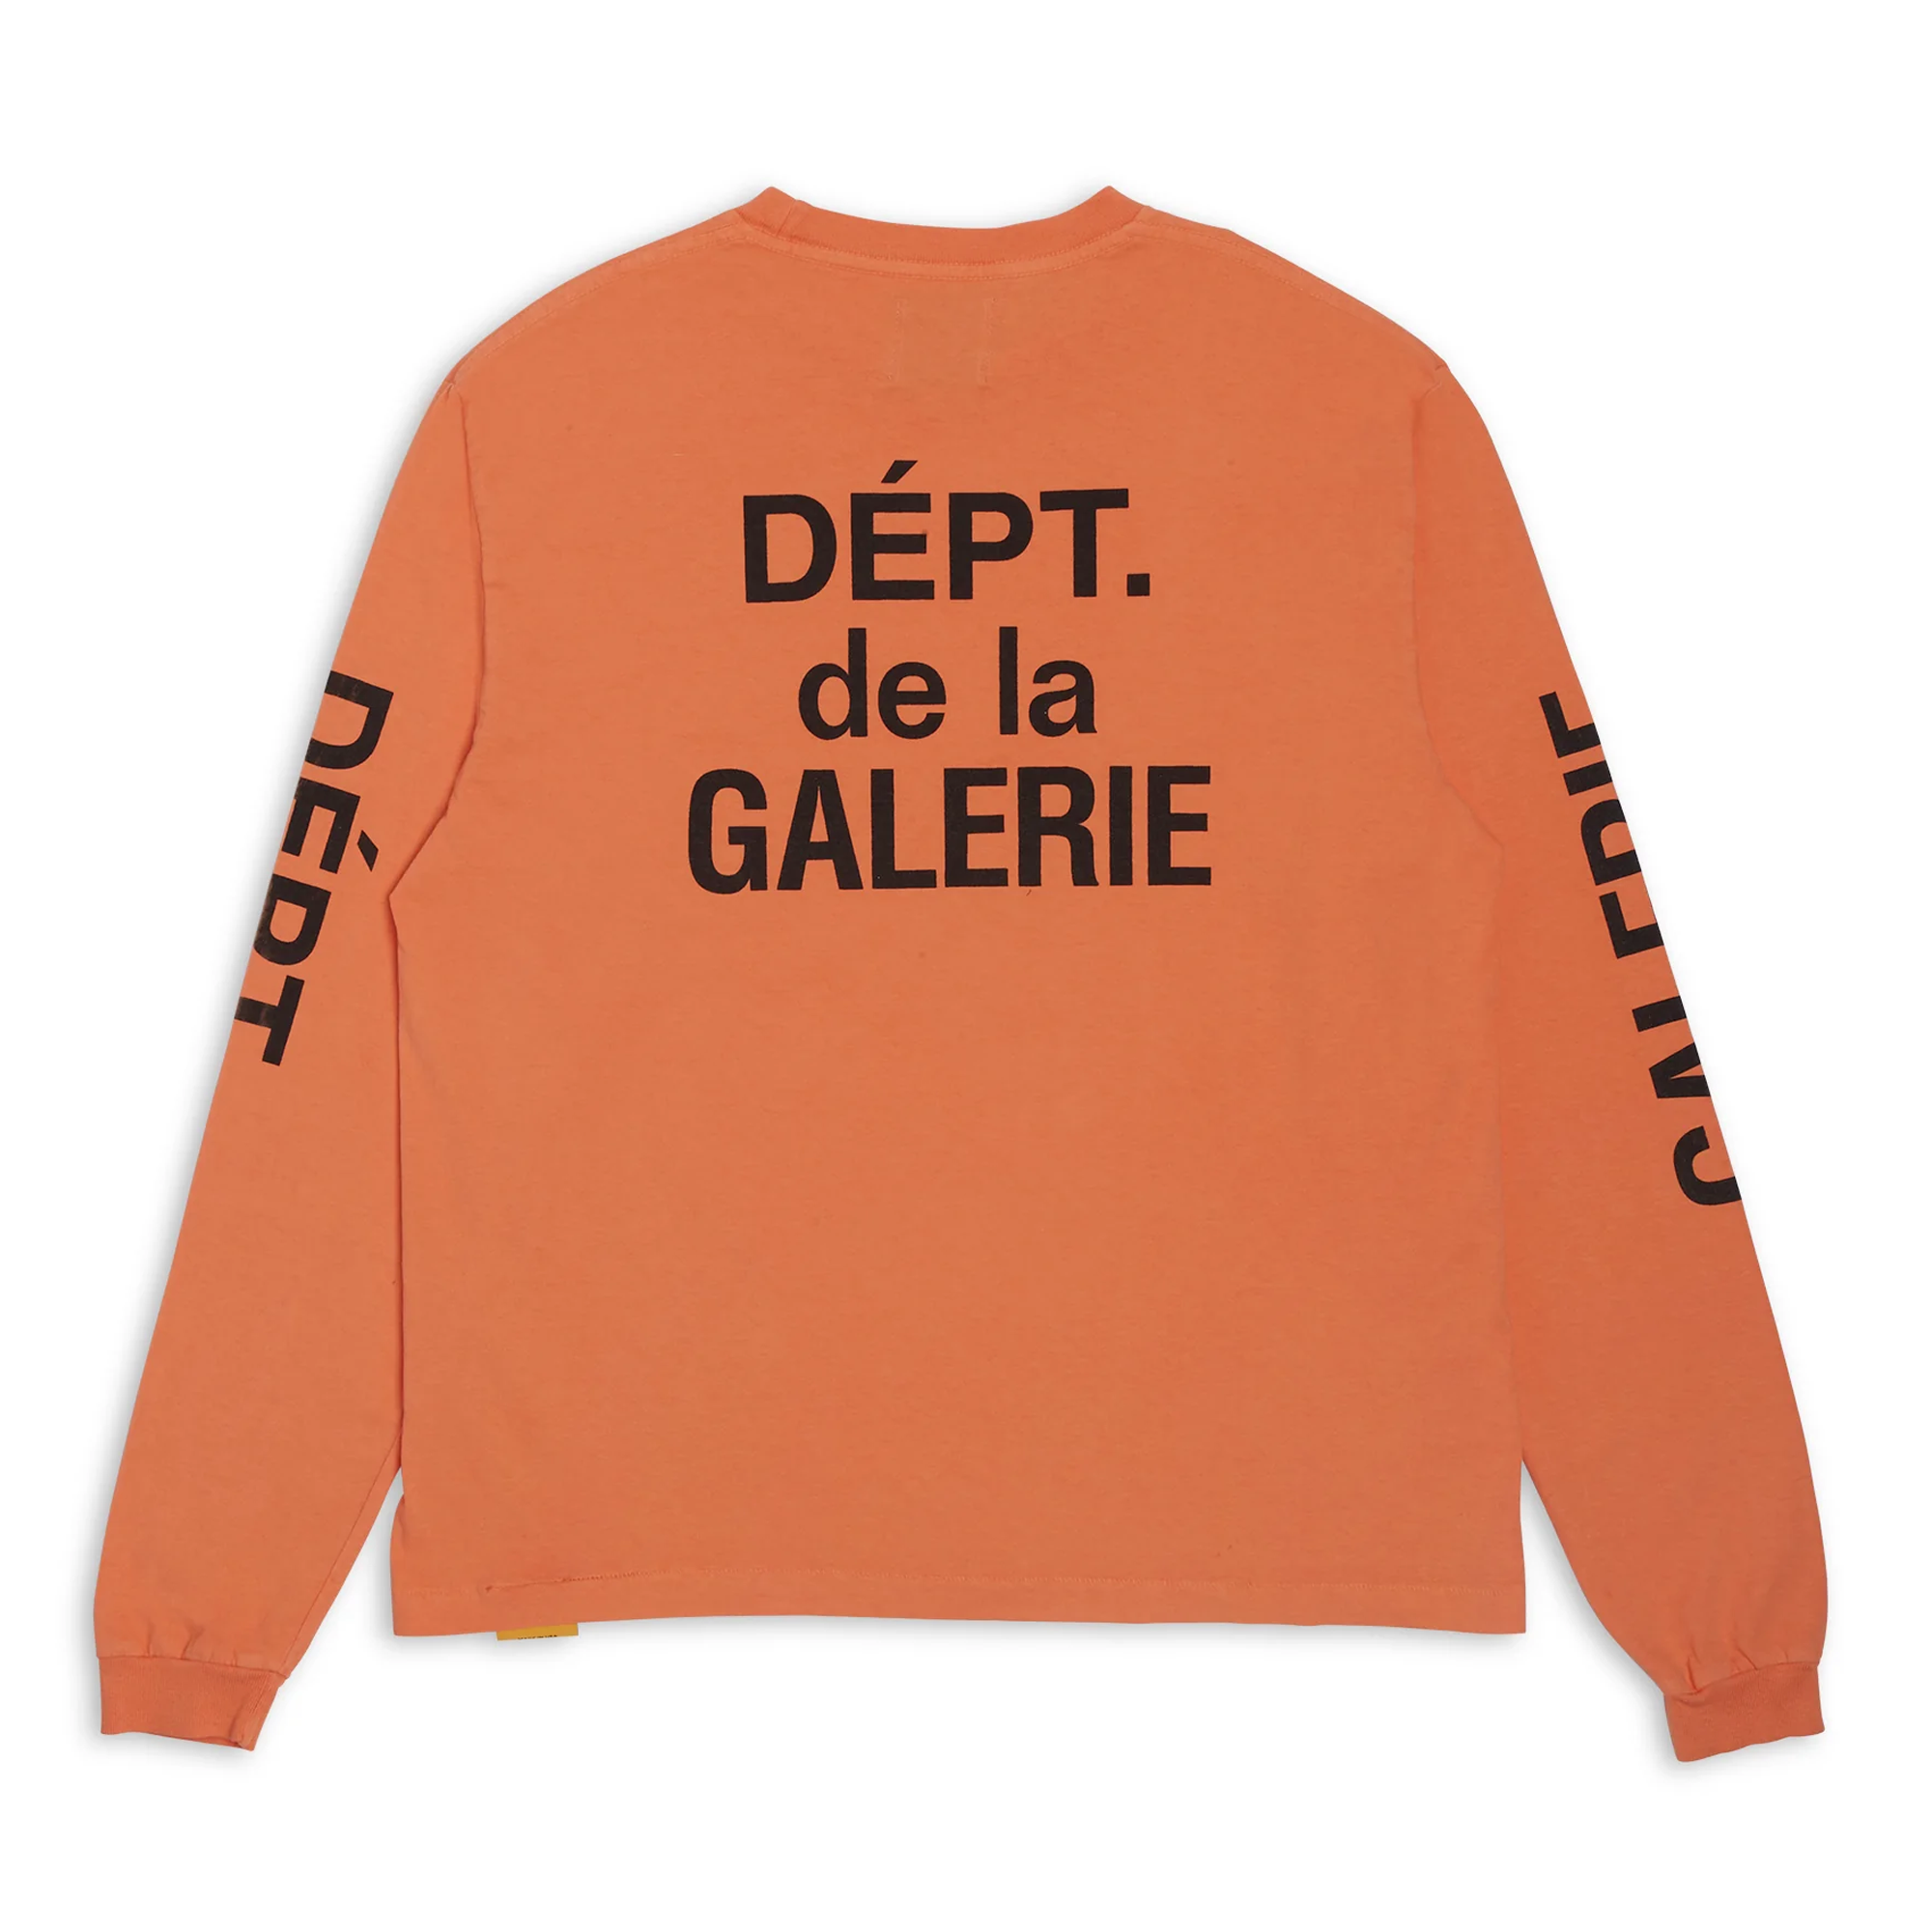 Gallery Dept. French Collector L/S Tee Orange-PLUS